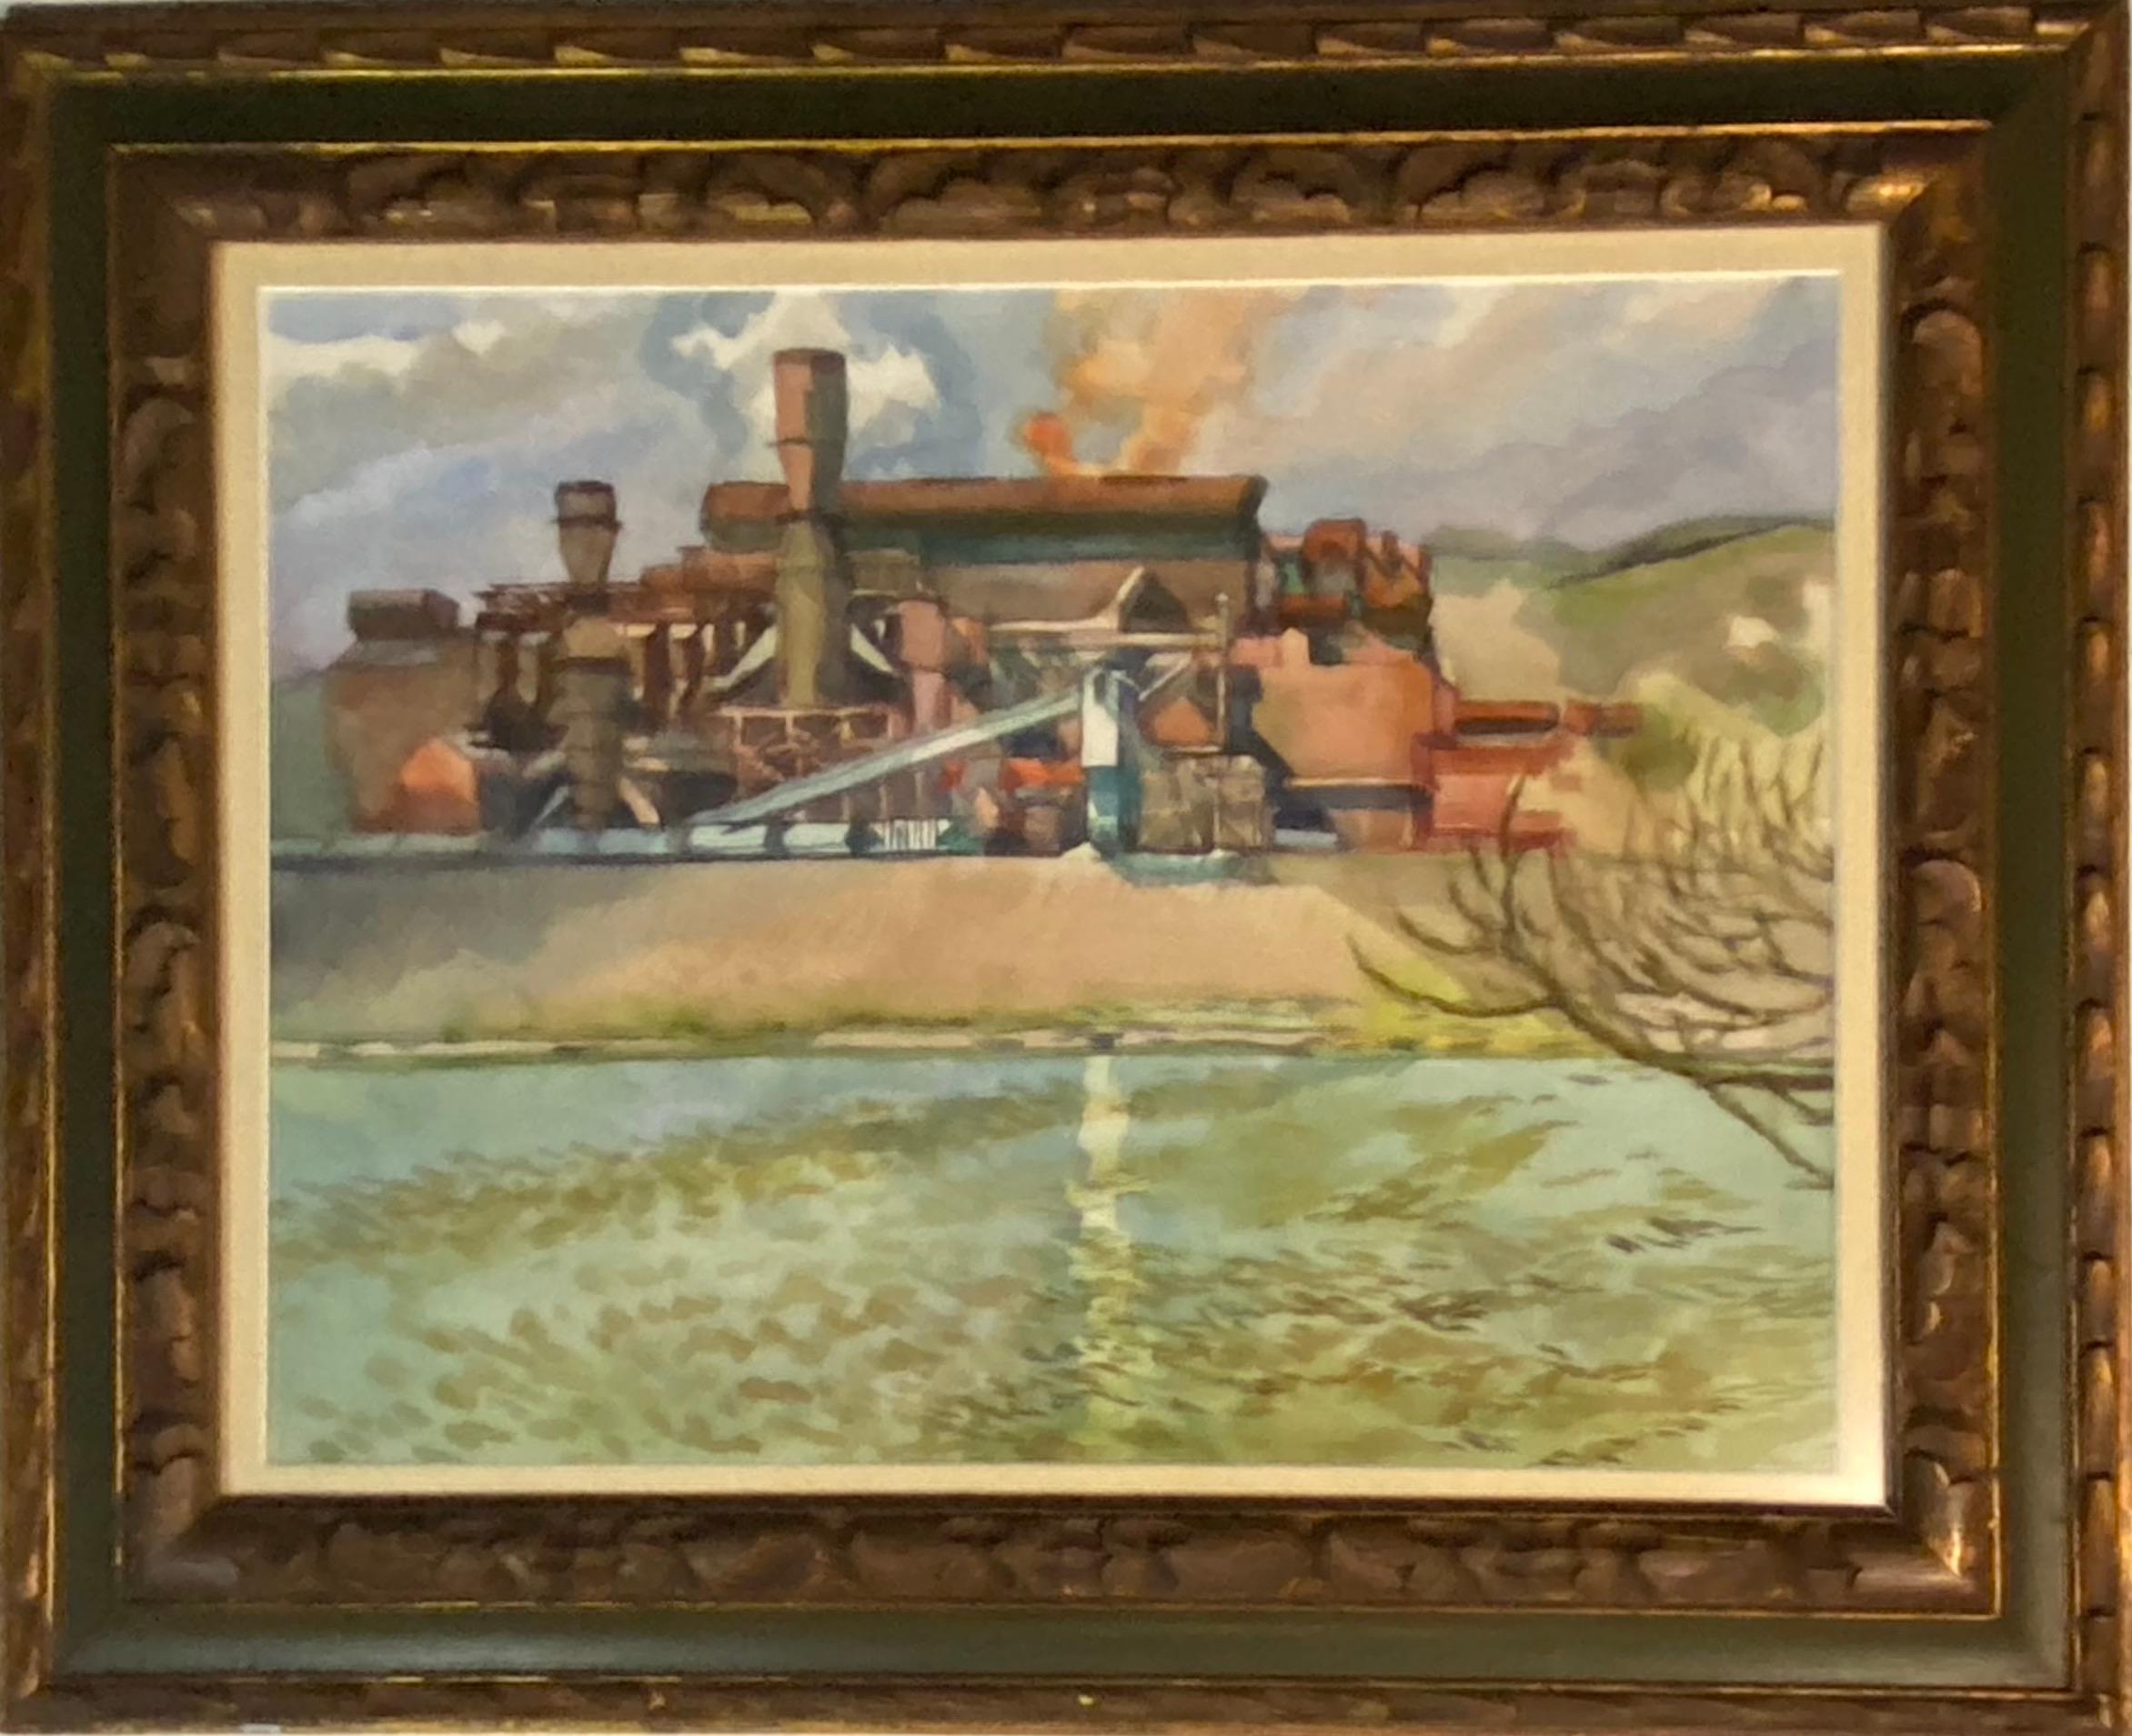 Industrial Landscape Contemporary American Watercolor Magic Realism 20th Century - American Realist Art by Henry Koerner 